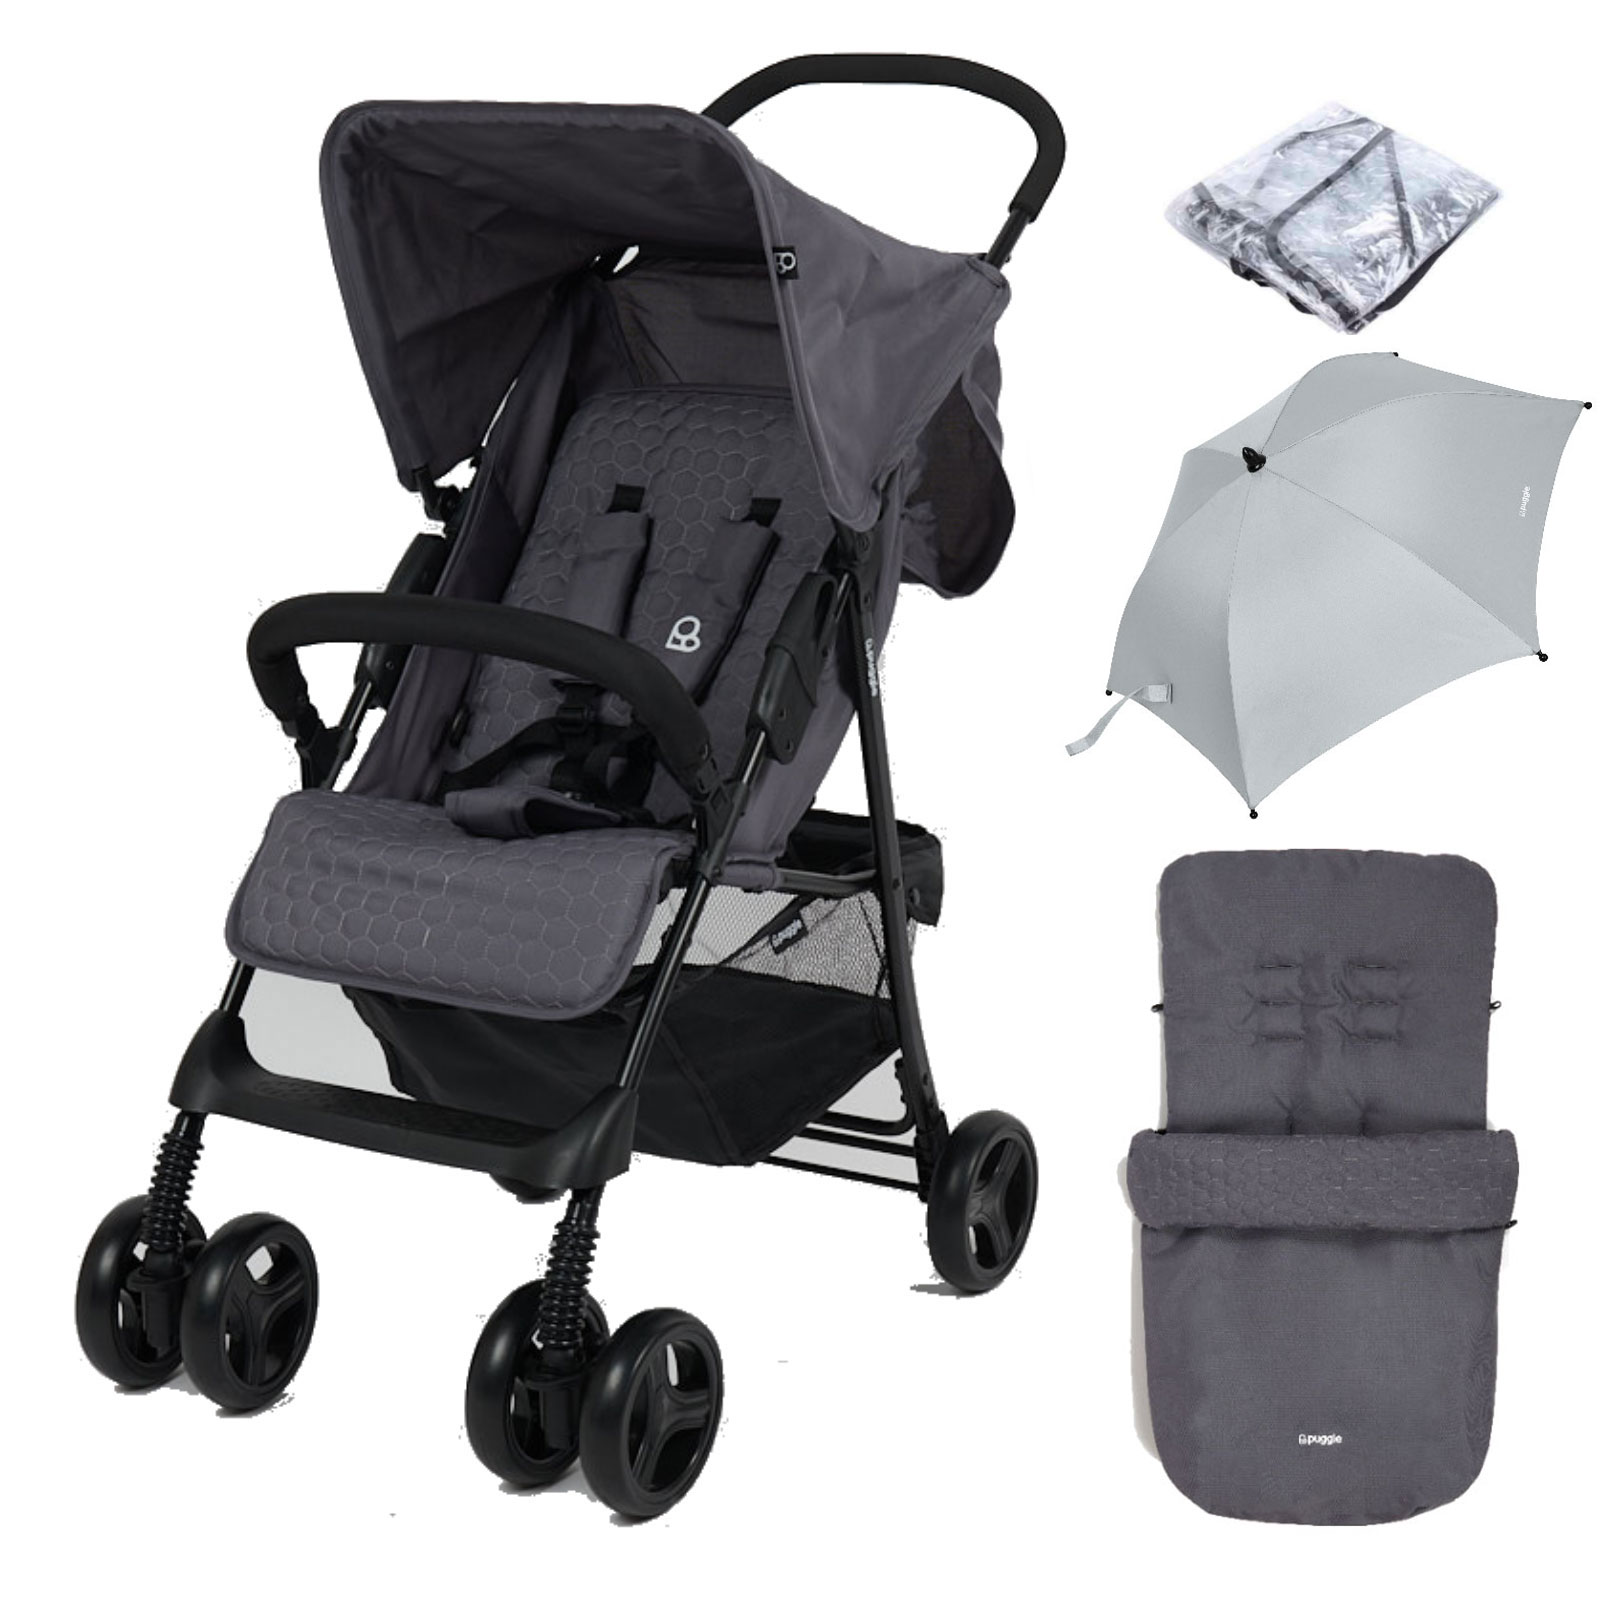 Puggle Holiday Luxe Pushchair Stroller with Raincover, Universal Footmuff and Parasol – Slate Grey